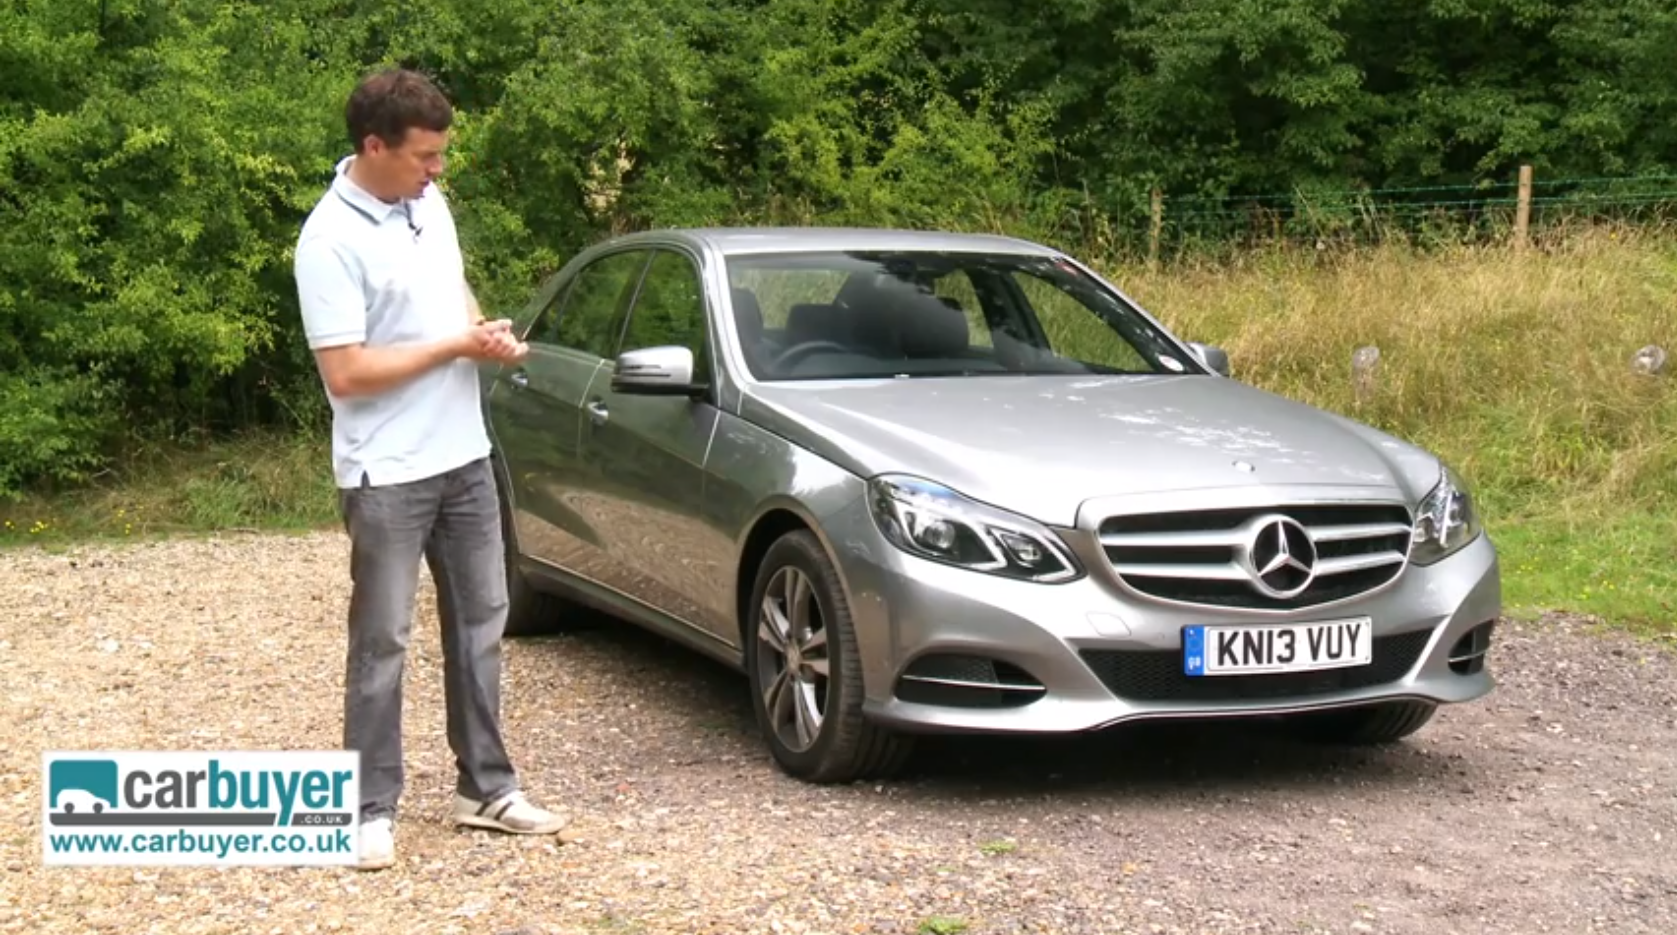 https://s1.cdn.autoevolution.com/images/news/w212-e-class-facelift-gets-reviewed-by-carbuyer-video-66920_1.png